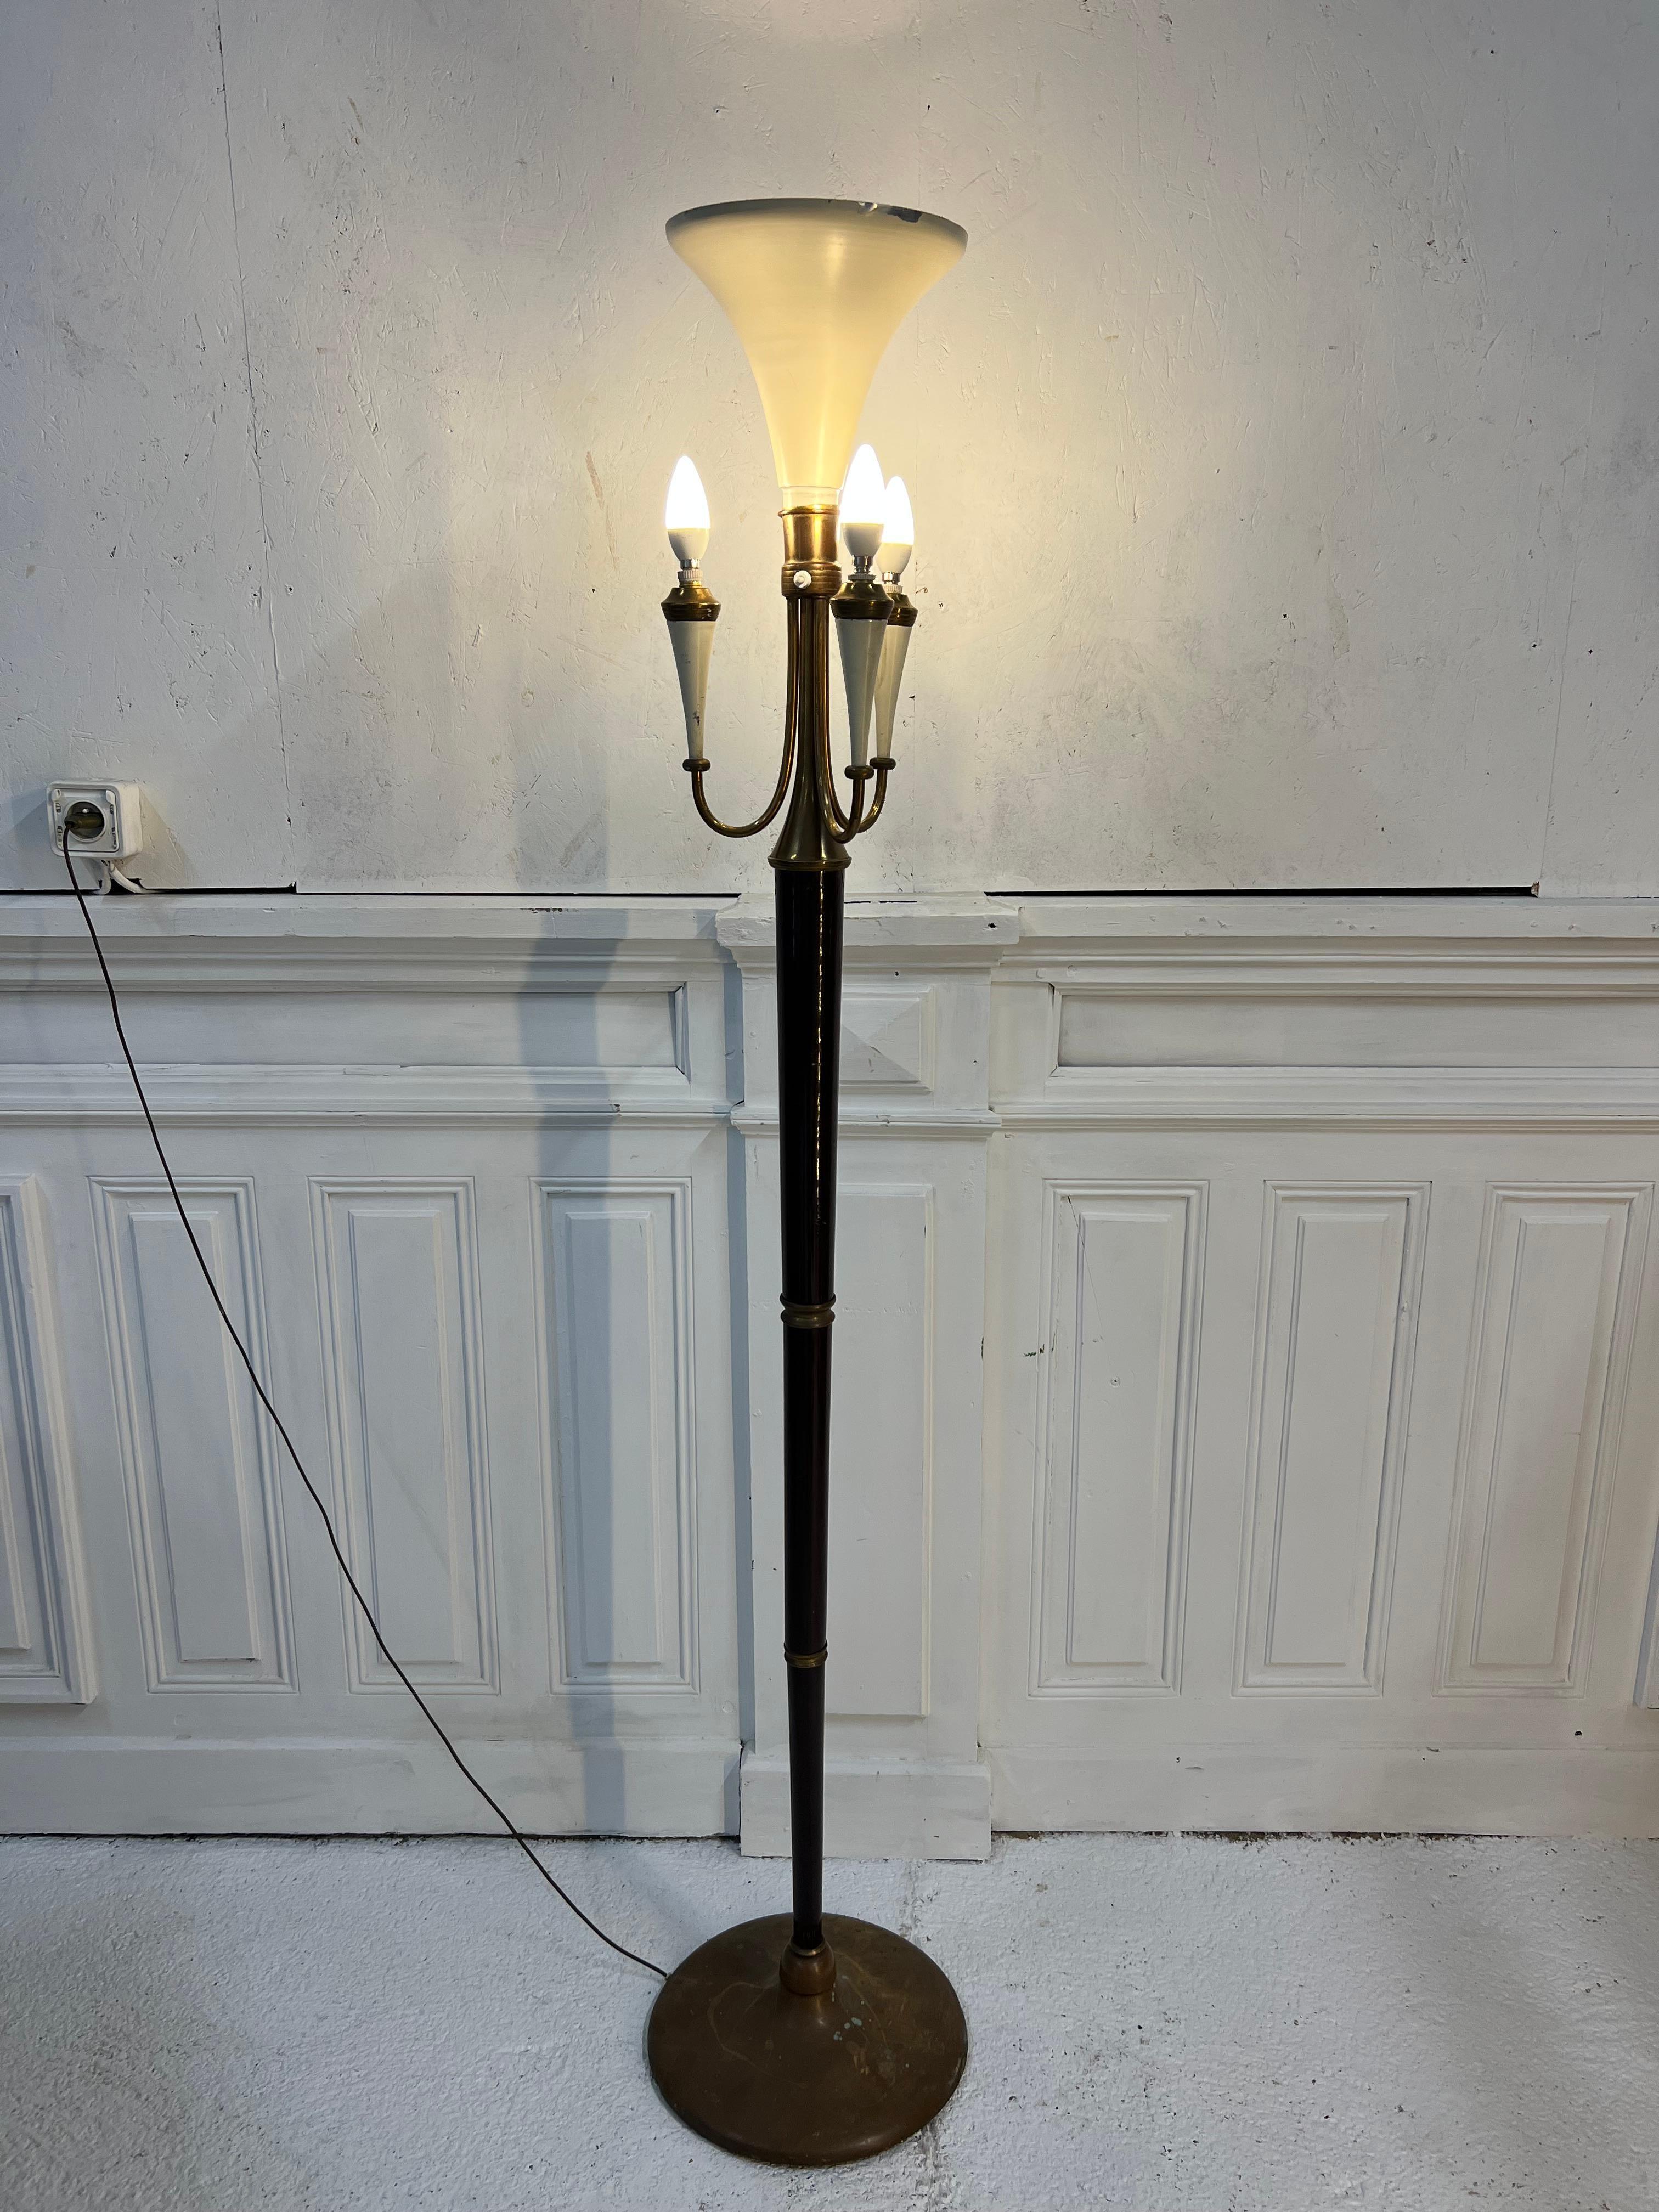 Floor lamp from the 1950s, Italian origin, in mahogany and brass
A switch to illuminate the Mazda-style painted metal lampshade and a second switch for the 3 lights
The brass has a nice patina

Its 1950s look will easily find its place in your